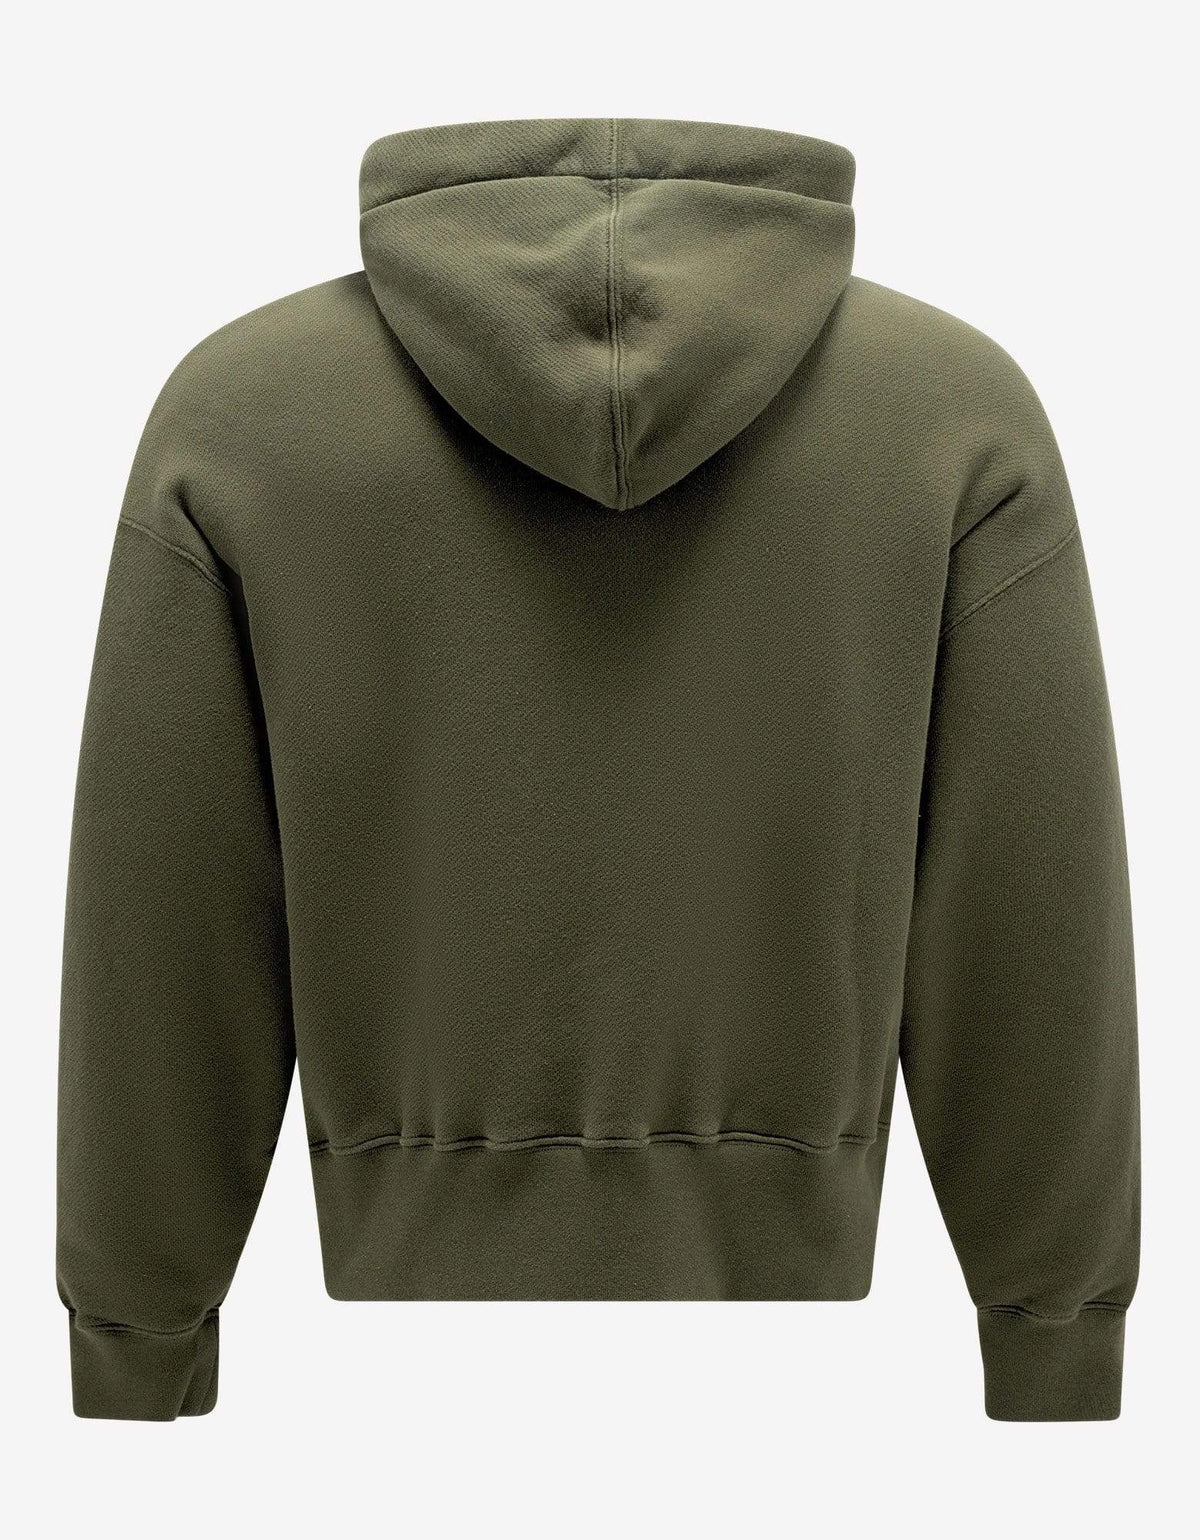 Palm Angels Military Green Bear Embroidery Hoodie